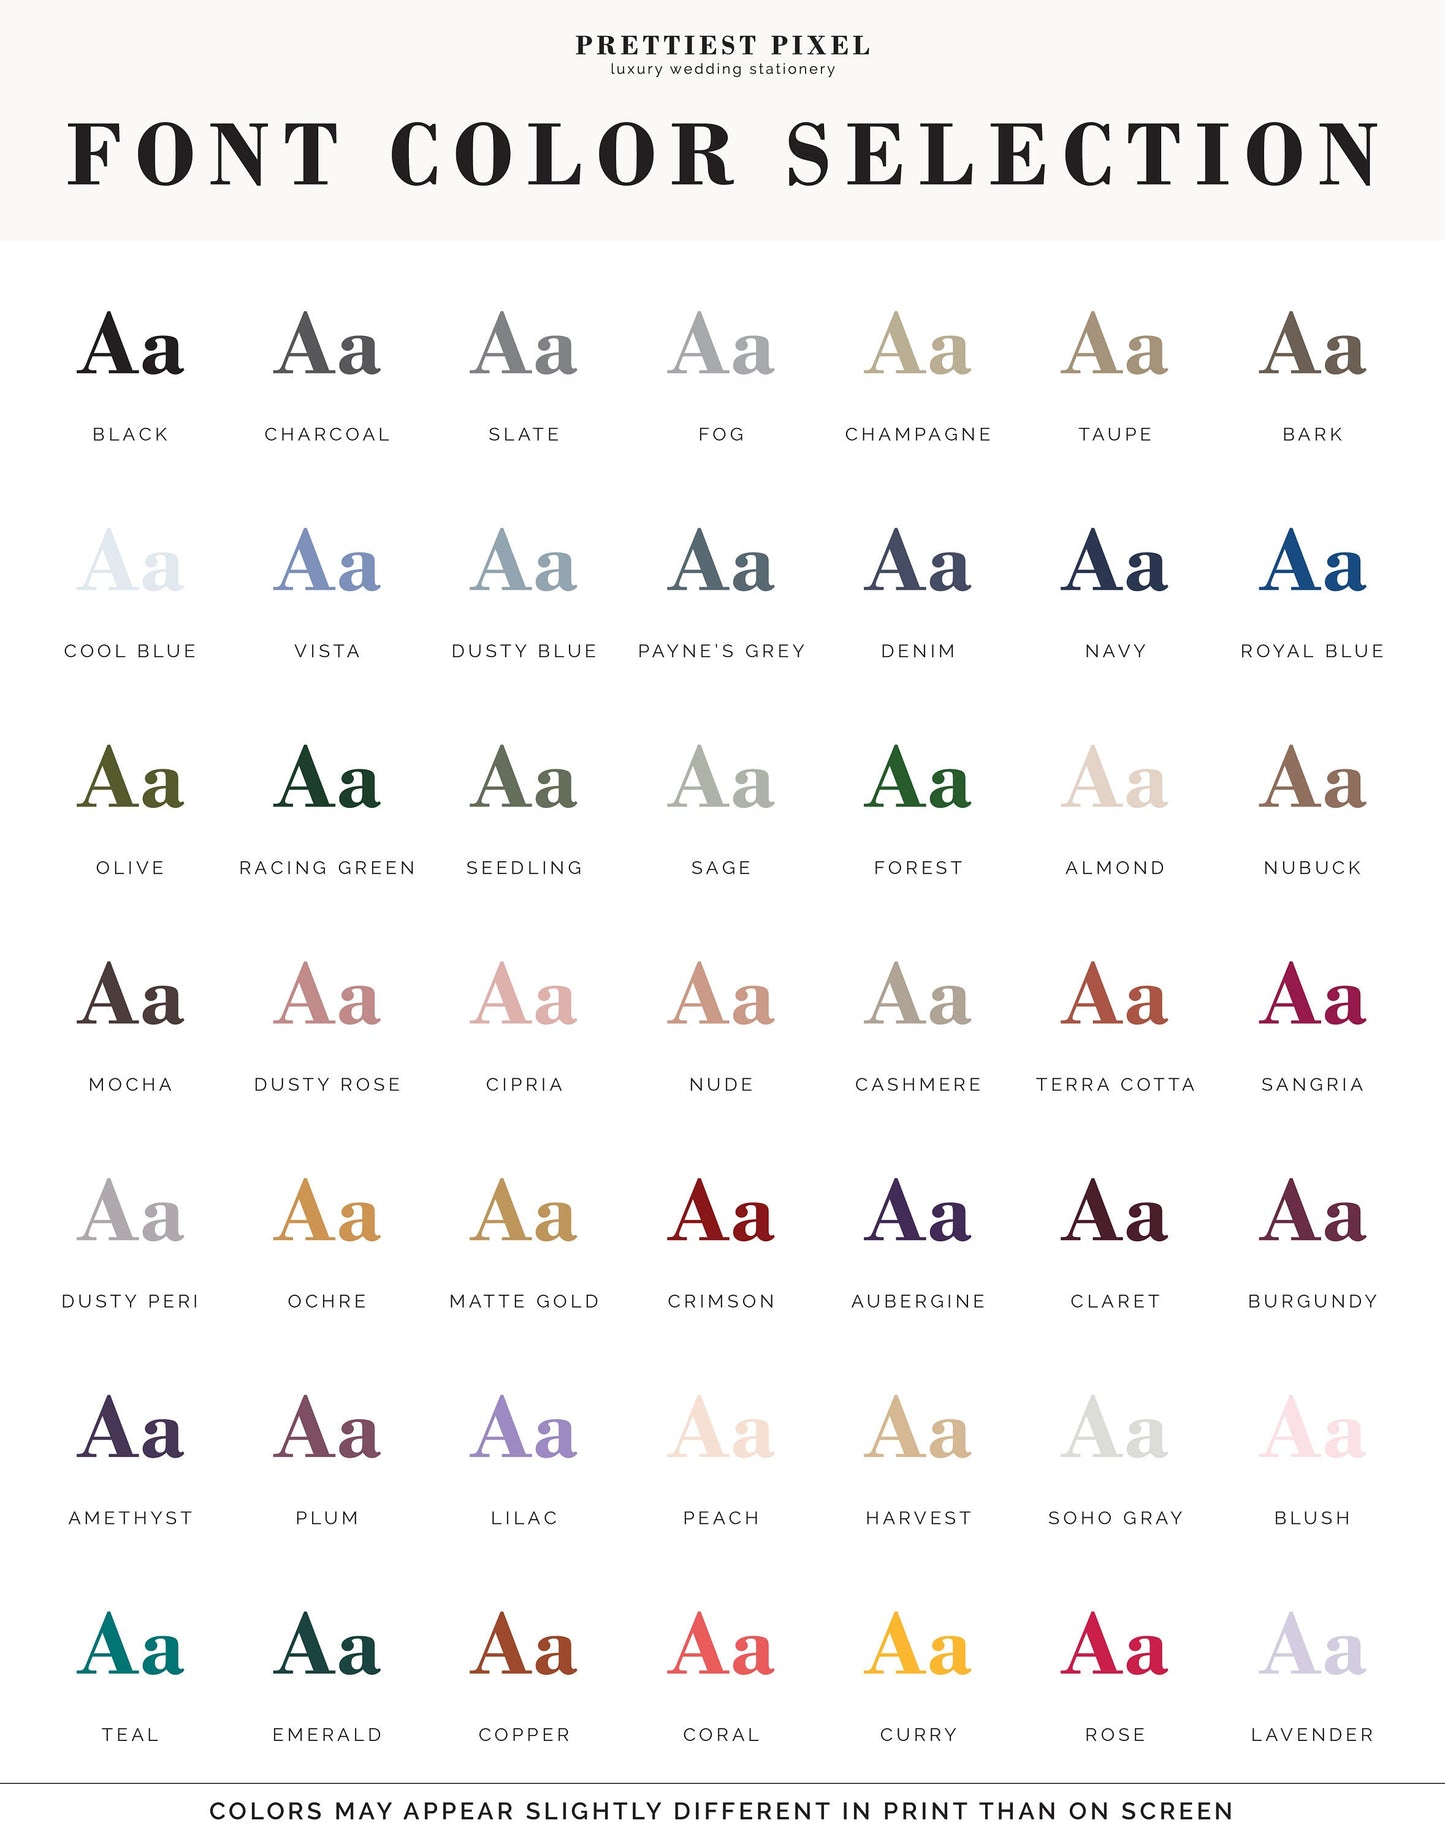 a poster with different font styles and colors